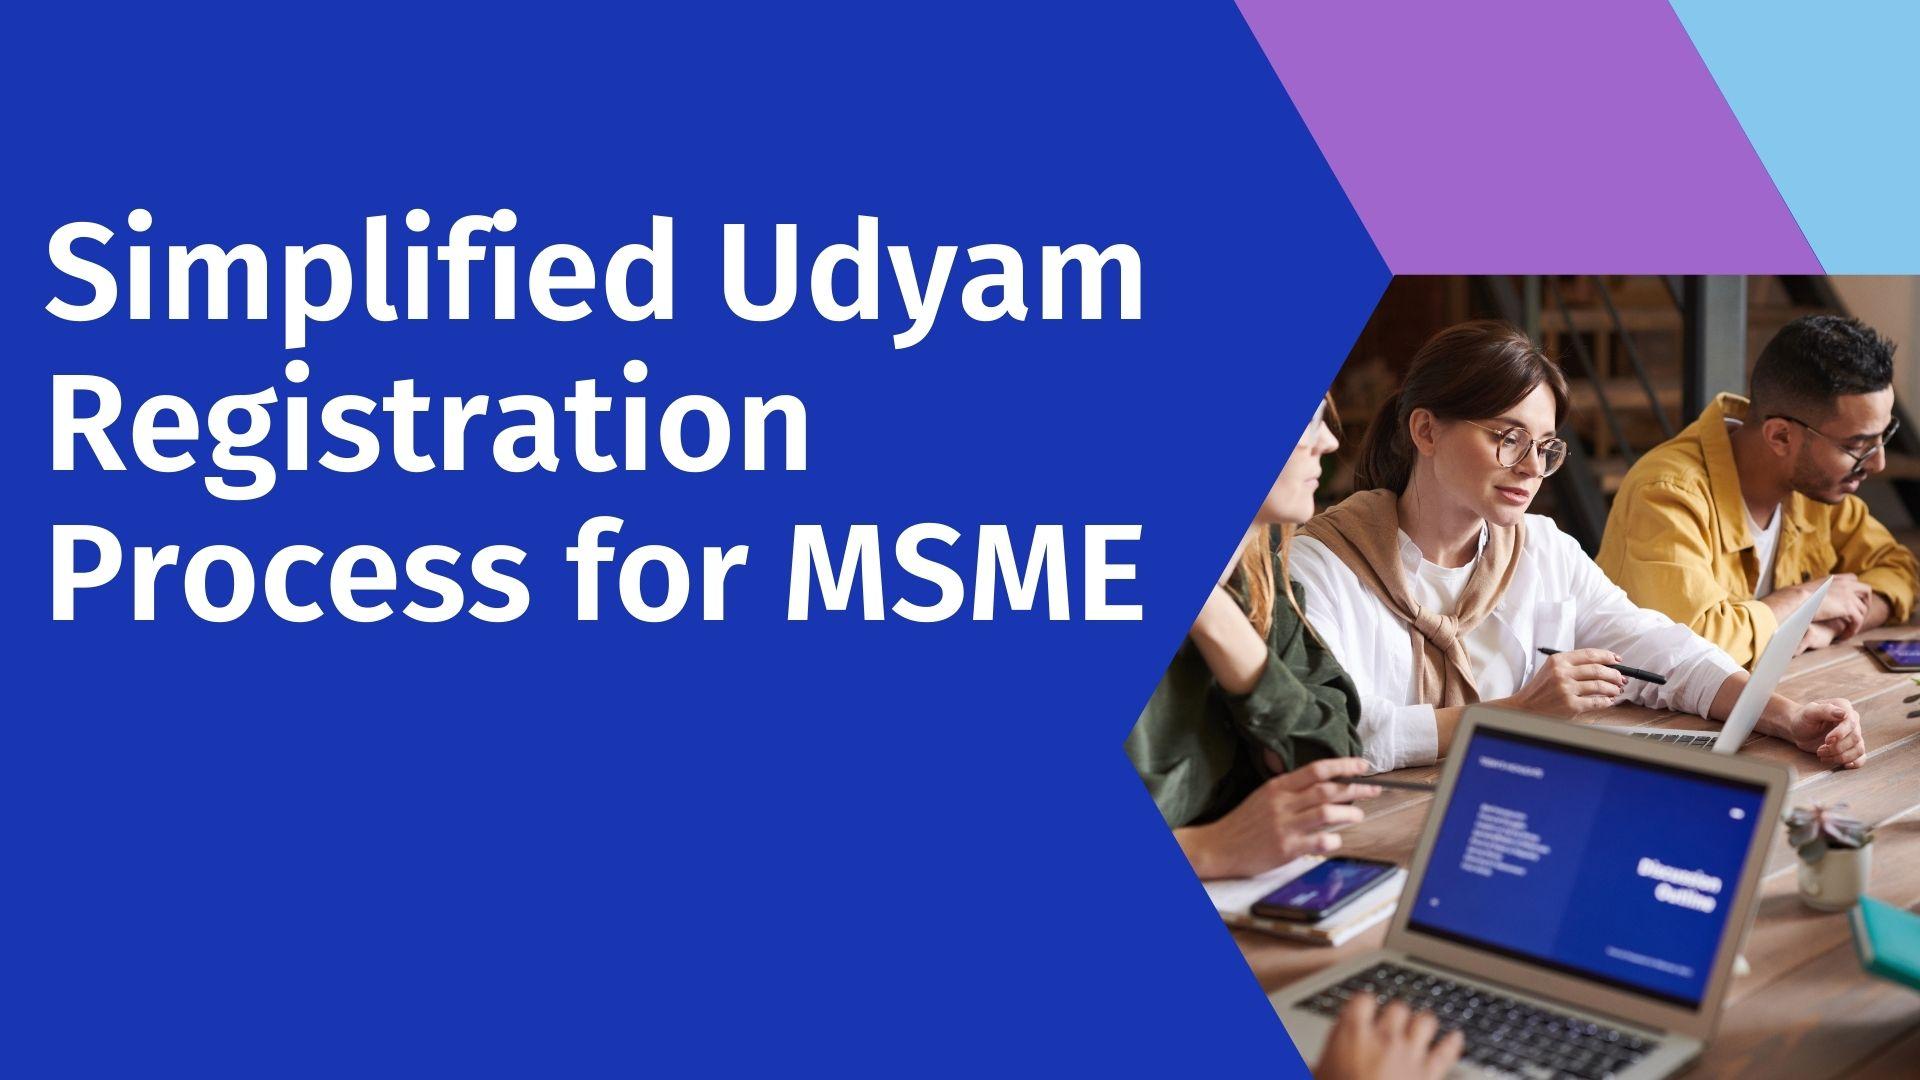 Simplified Udyam Registration Process for MSME